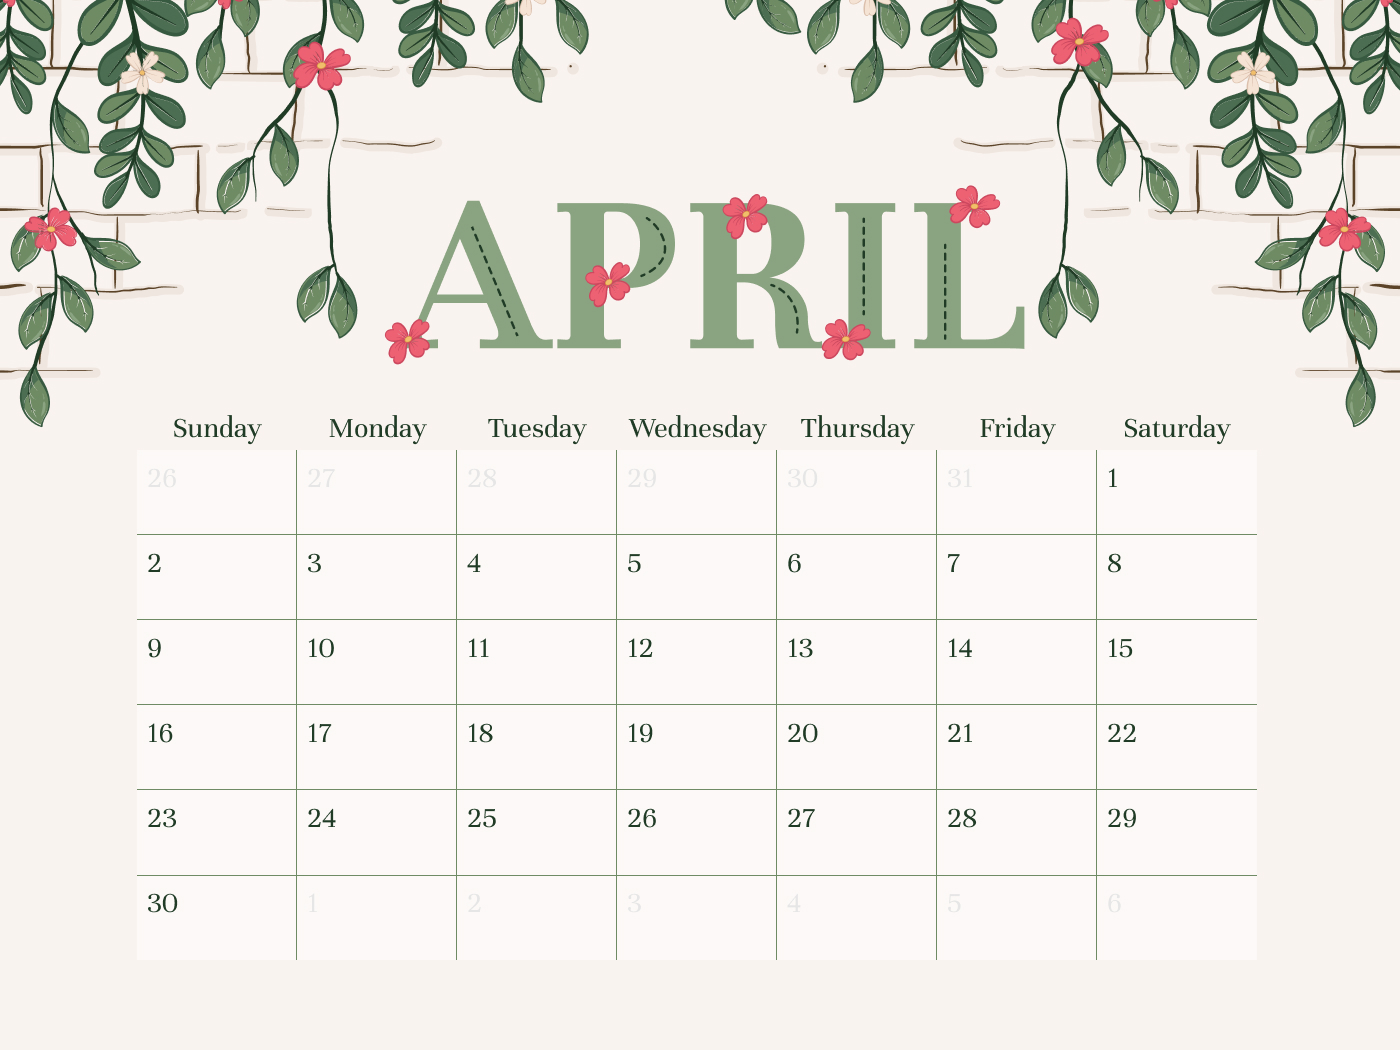 Calendar for the month of april.